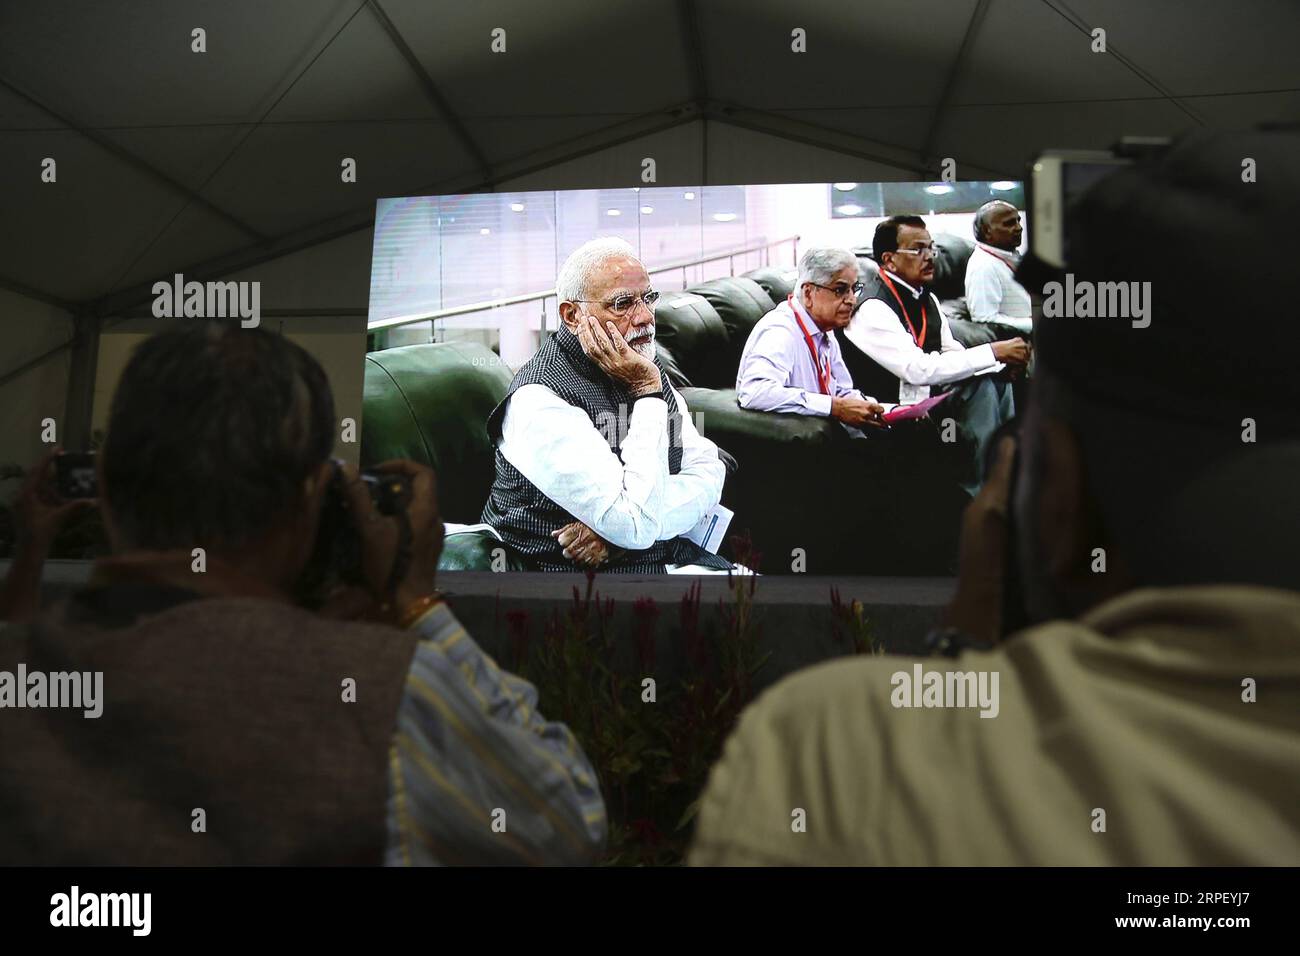 (190907) -- BANGALORE, Sept. 7, 2019 (Xinhua) -- Indian Prime Minister Narendra Modi is seen on a TV screen as he watches the live broadcast of the landing process of Chandrayaan-2 s Lander Vikram on the moon surface in Bangalore, India, Sept. 7, 2019. India s second Moon mission, Chandrayaan-2 s Lander Vikram, lost communication with the ground station at an altitude of 2.1 kilometers from the Lunar surface, said Indian Space Research Organisation (ISRO) chief K. Sivan on Saturday. Vikram was scheduled to land on the moon surface at around 01:55 a.m. (Indian Standard Time). (Str/Xinhua) (SCI- Stock Photo